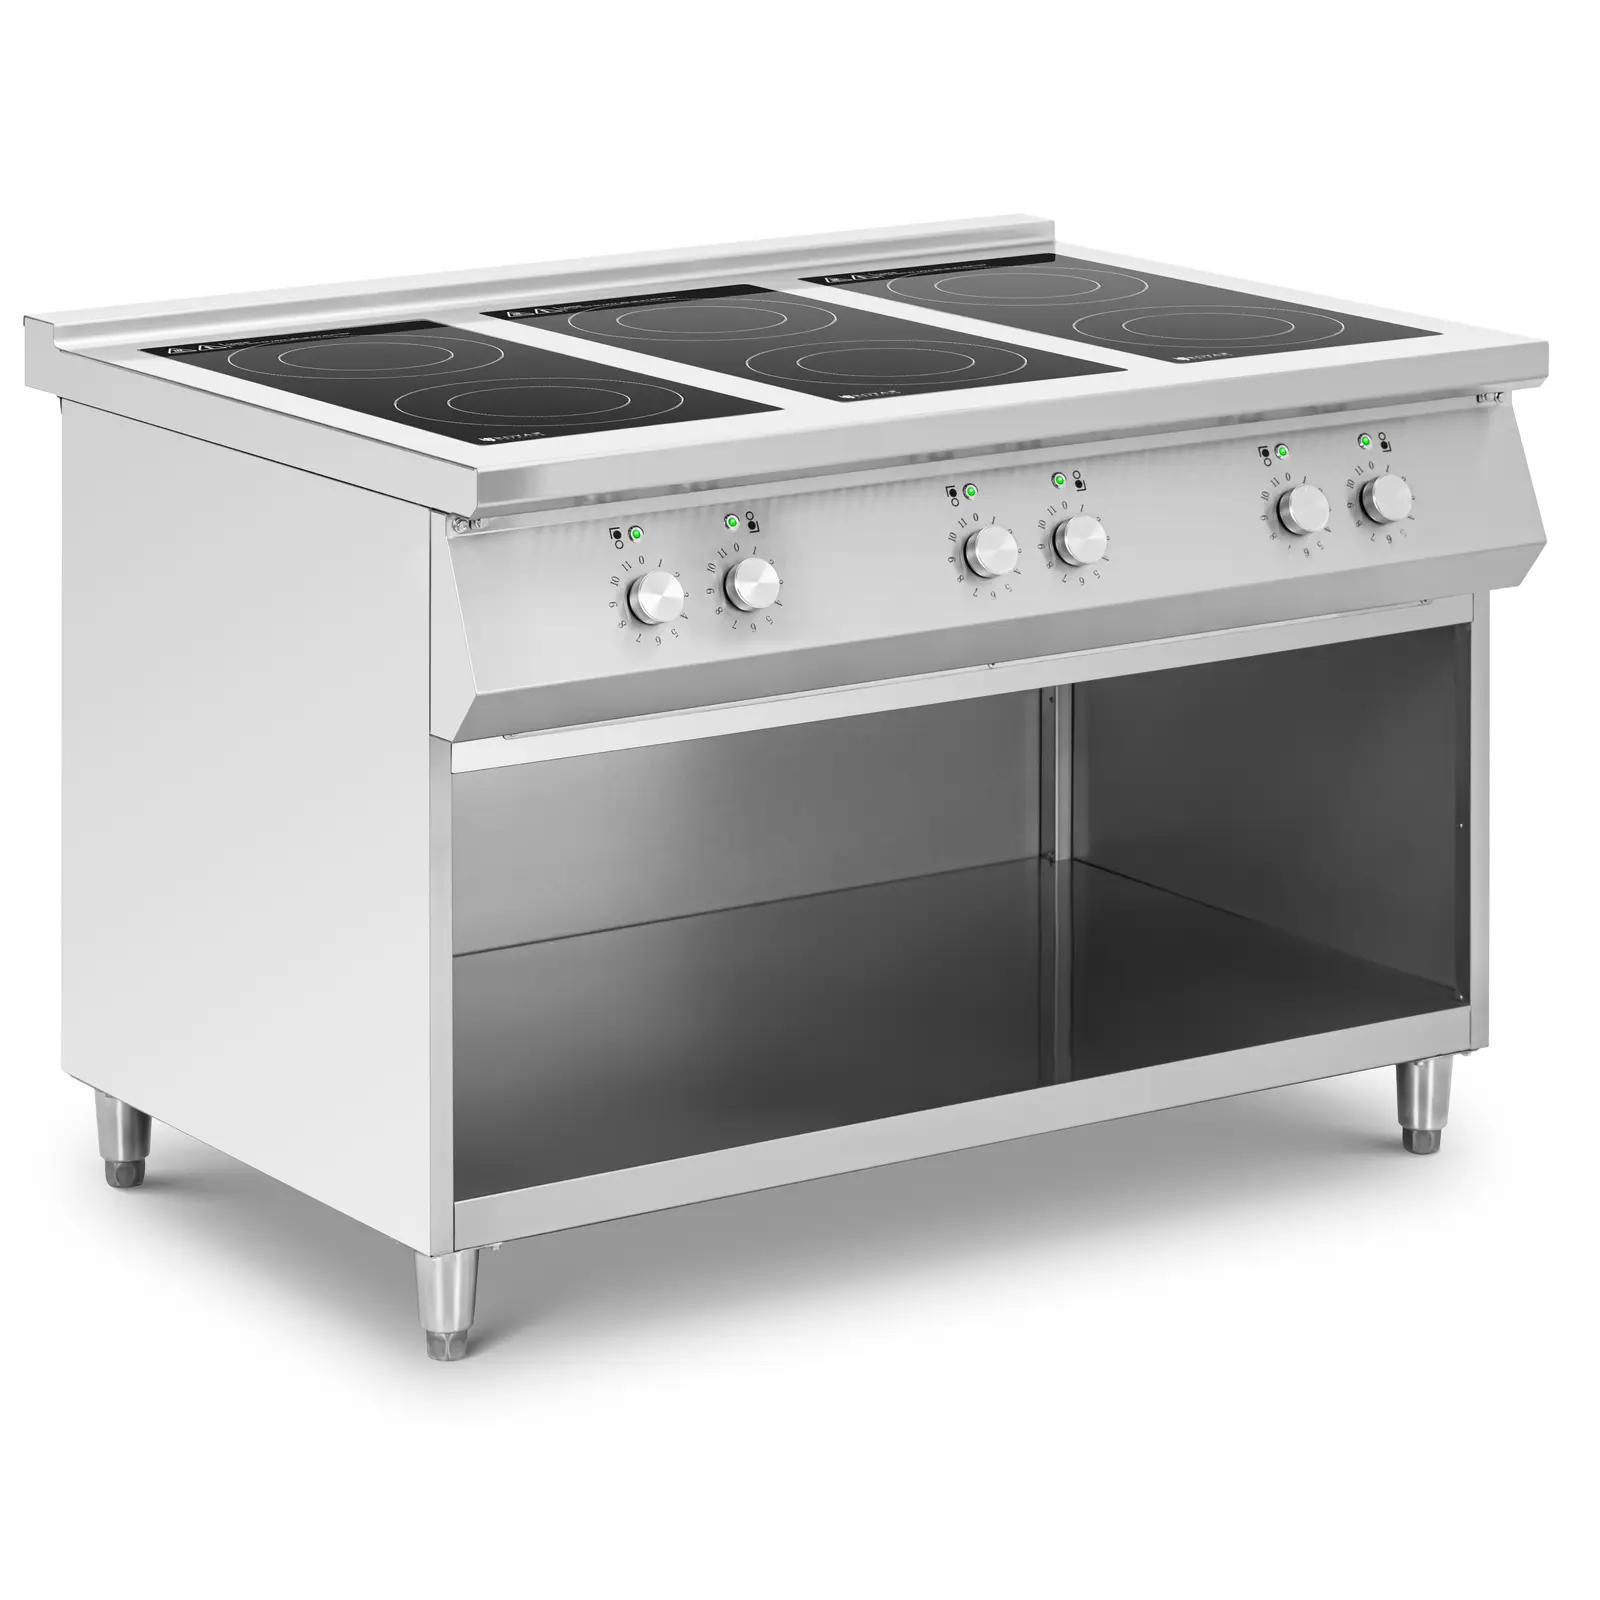 Induction Hob - with open base - 6 hobs - 25.5 kW - up to 260 °C - stainless steel - Royal Catering